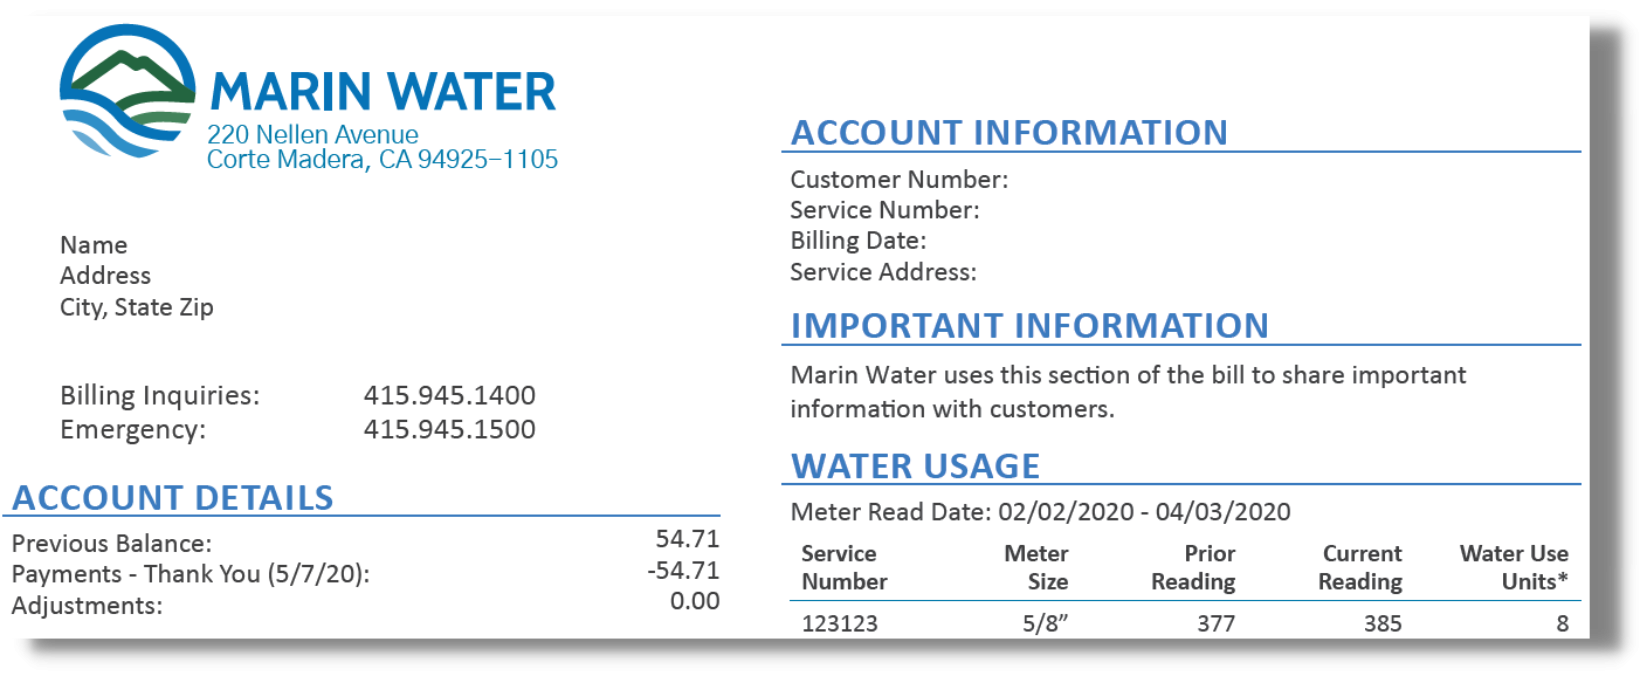 Image shows a screen capture of a sample water bill for Marin Water.